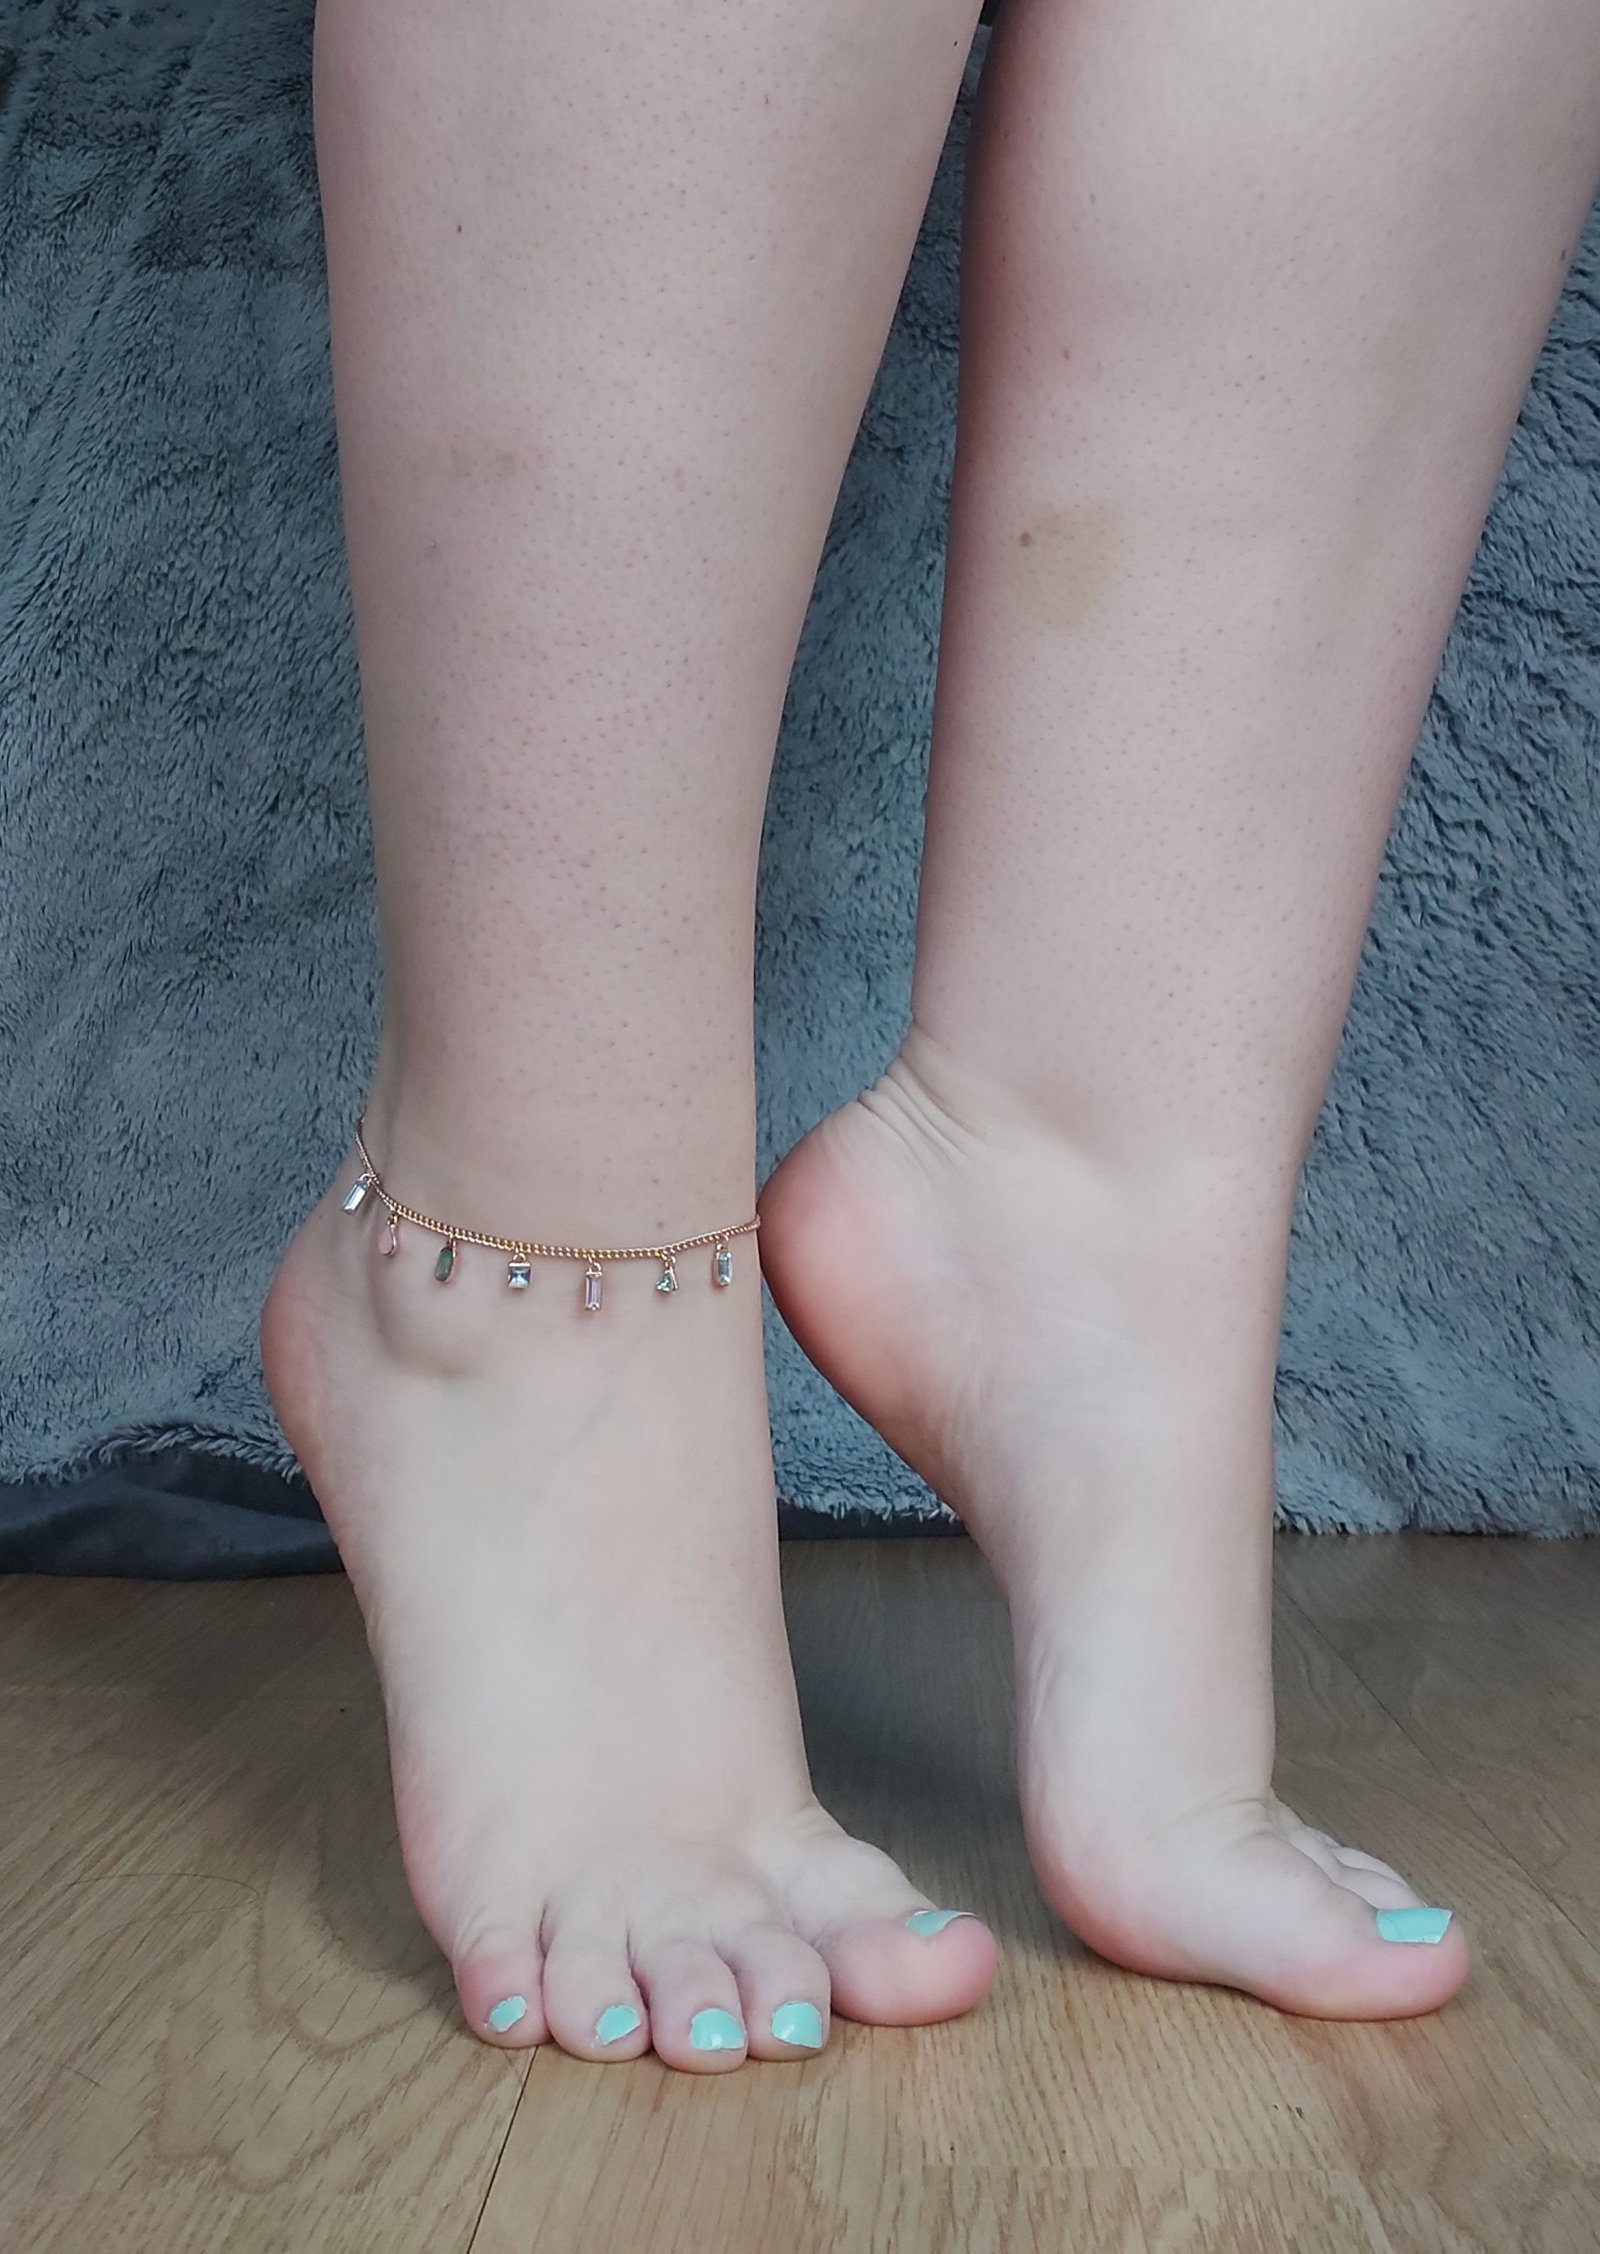 Photo by Barefootdaisyx with the username @Barefootdaisyx,  August 27, 2020 at 2:22 AM. The post is about the topic Foot Worship and the text says 'come join me on twitter and onlyfans @Barefootdaisy2 ❤❤'